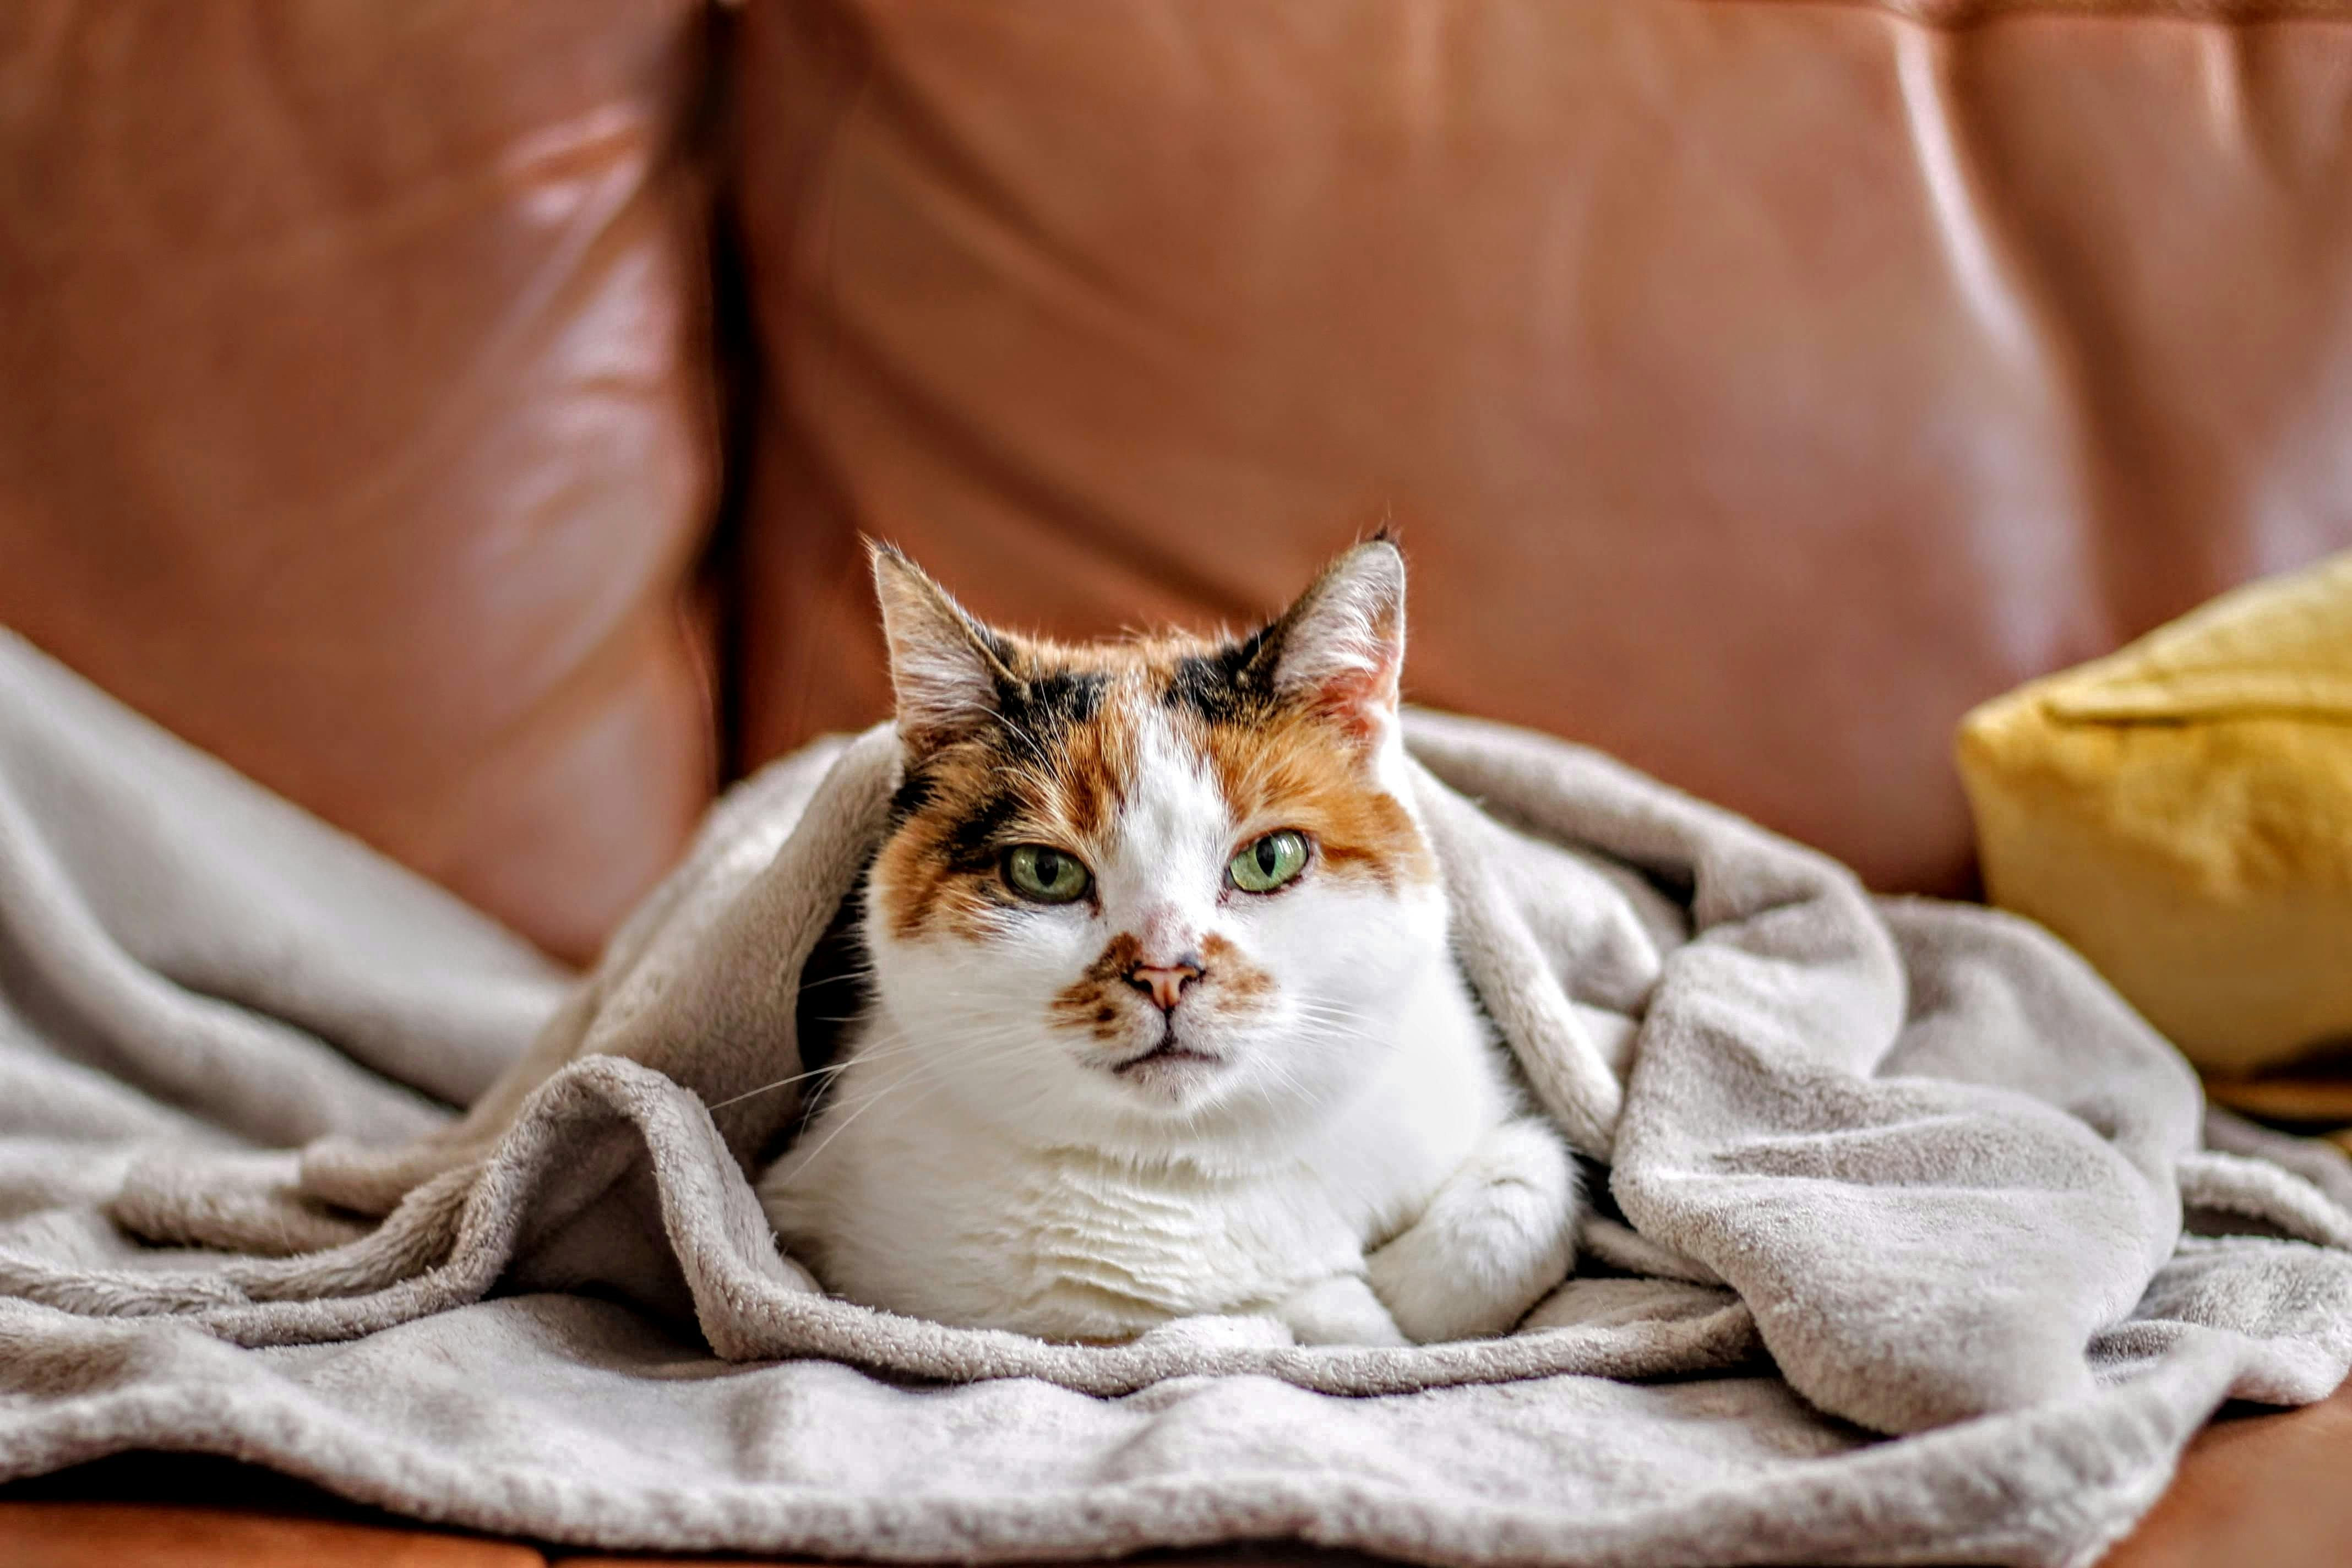 Calico cat curled in a blanket on a couch.